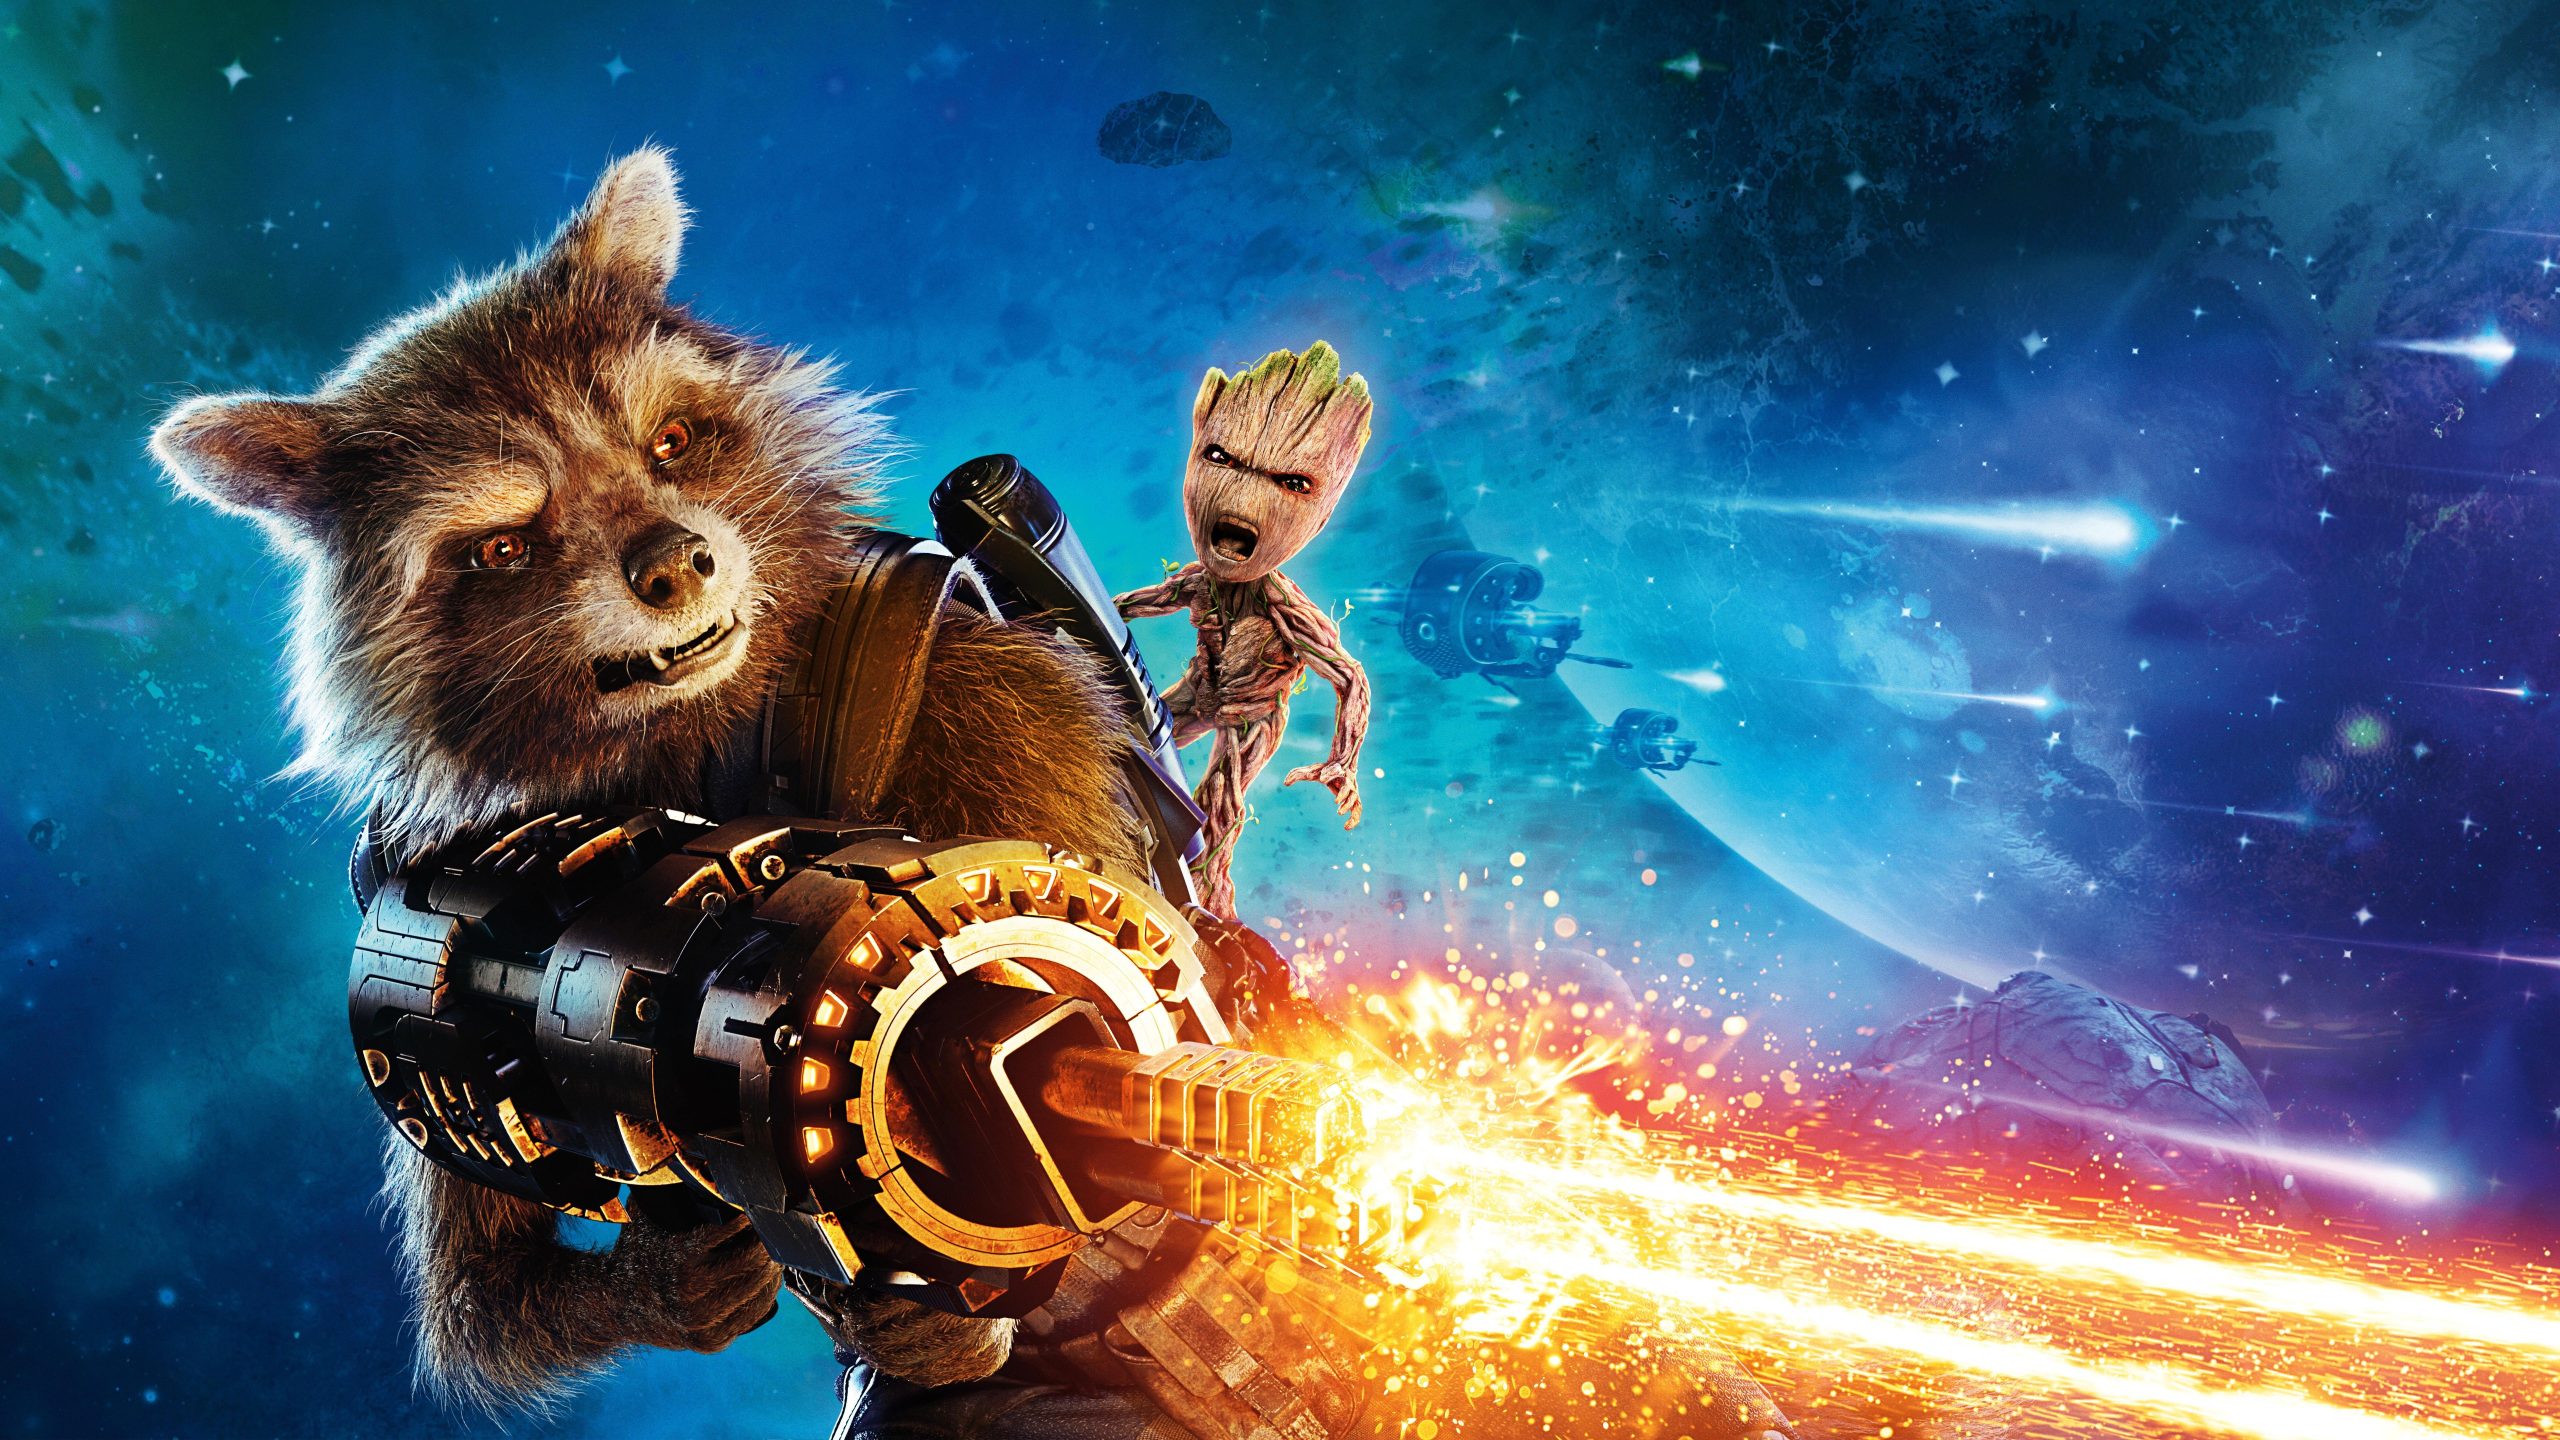 Cute Baby Groot Guardians Of The Galaxy Hd Wallpapers 4k, Cute Baby Groot Guardians Of The Galaxy, Movies